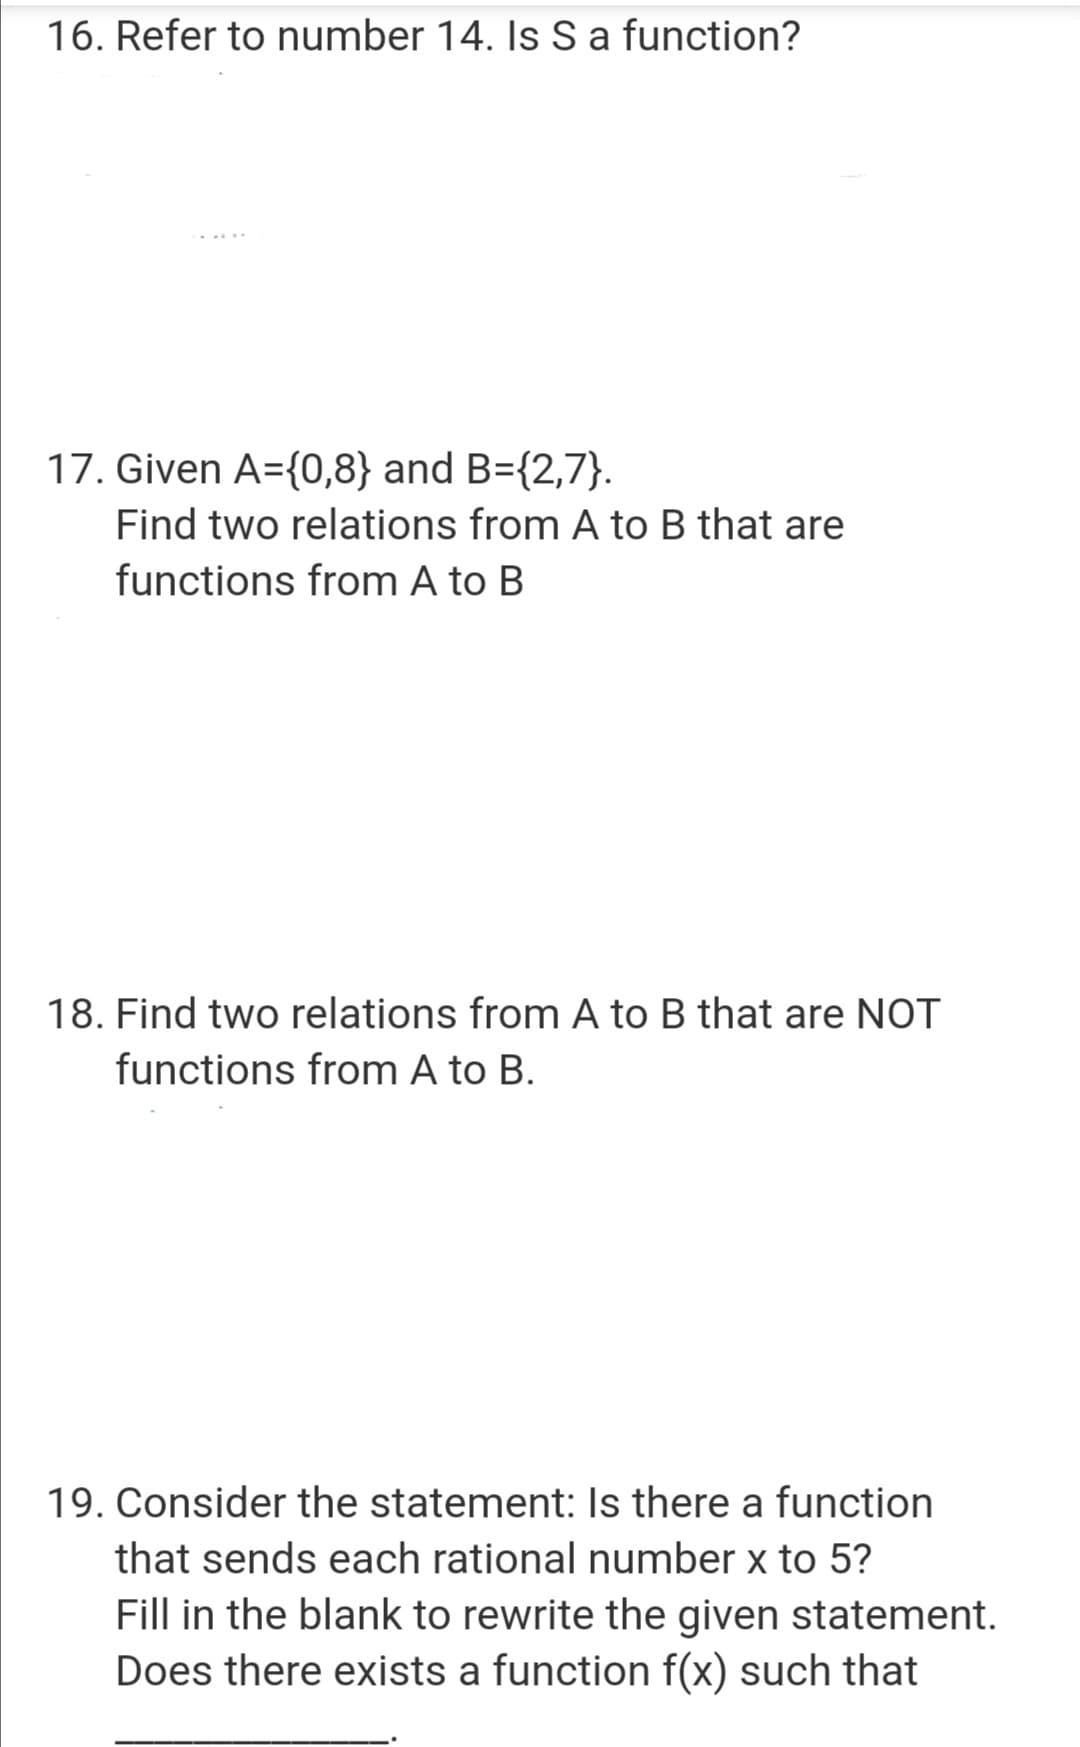 16. Refer to number 14. Is S a function?
17. Given A={0,8} and B={2,7}.
Find two relations from A to B that are
functions from A to B
18. Find two relations from A to B that are NOT
functions from A to B.
19. Consider the statement: Is there a function
that sends each rational number x to 5?
Fill in the blank to rewrite the given statement.
Does there exists a function f(x) such that
